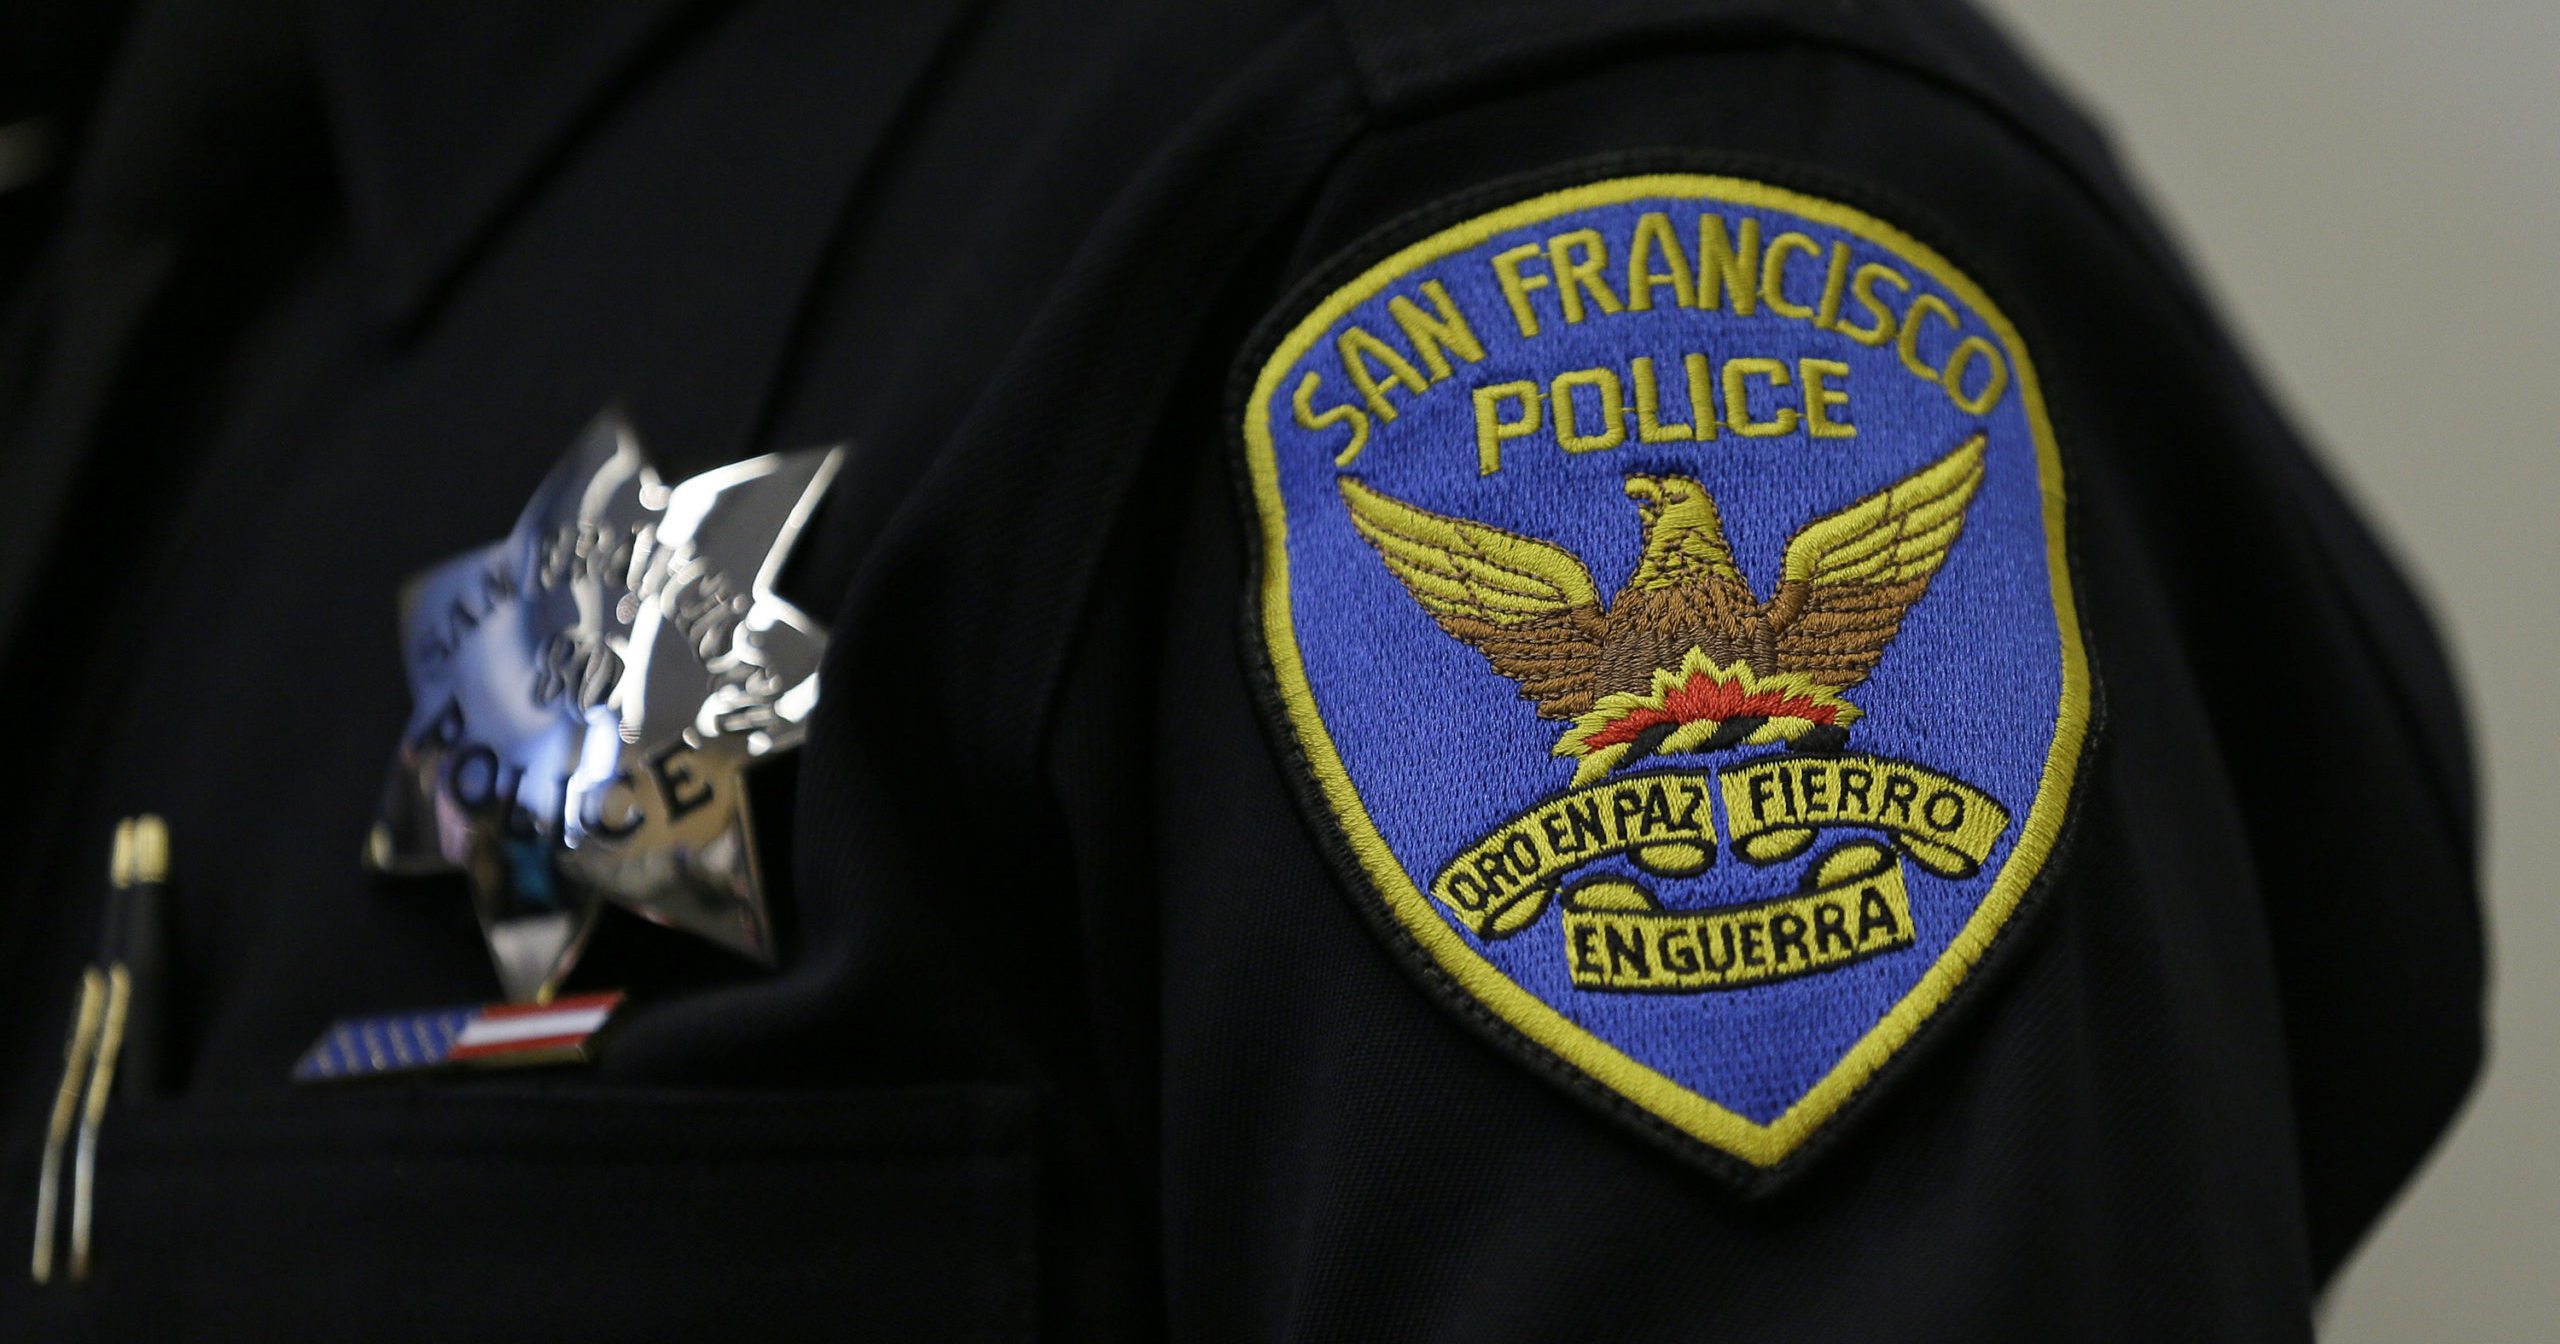 This April 29, 2016, file photo shows a patch and badge on the uniform of a San Francisco police officer. The San Francisco Police Department will stop releasing mug shots in an effort to stop perpetuating racial stereotypes, the police chief announced on July 1, 2020.